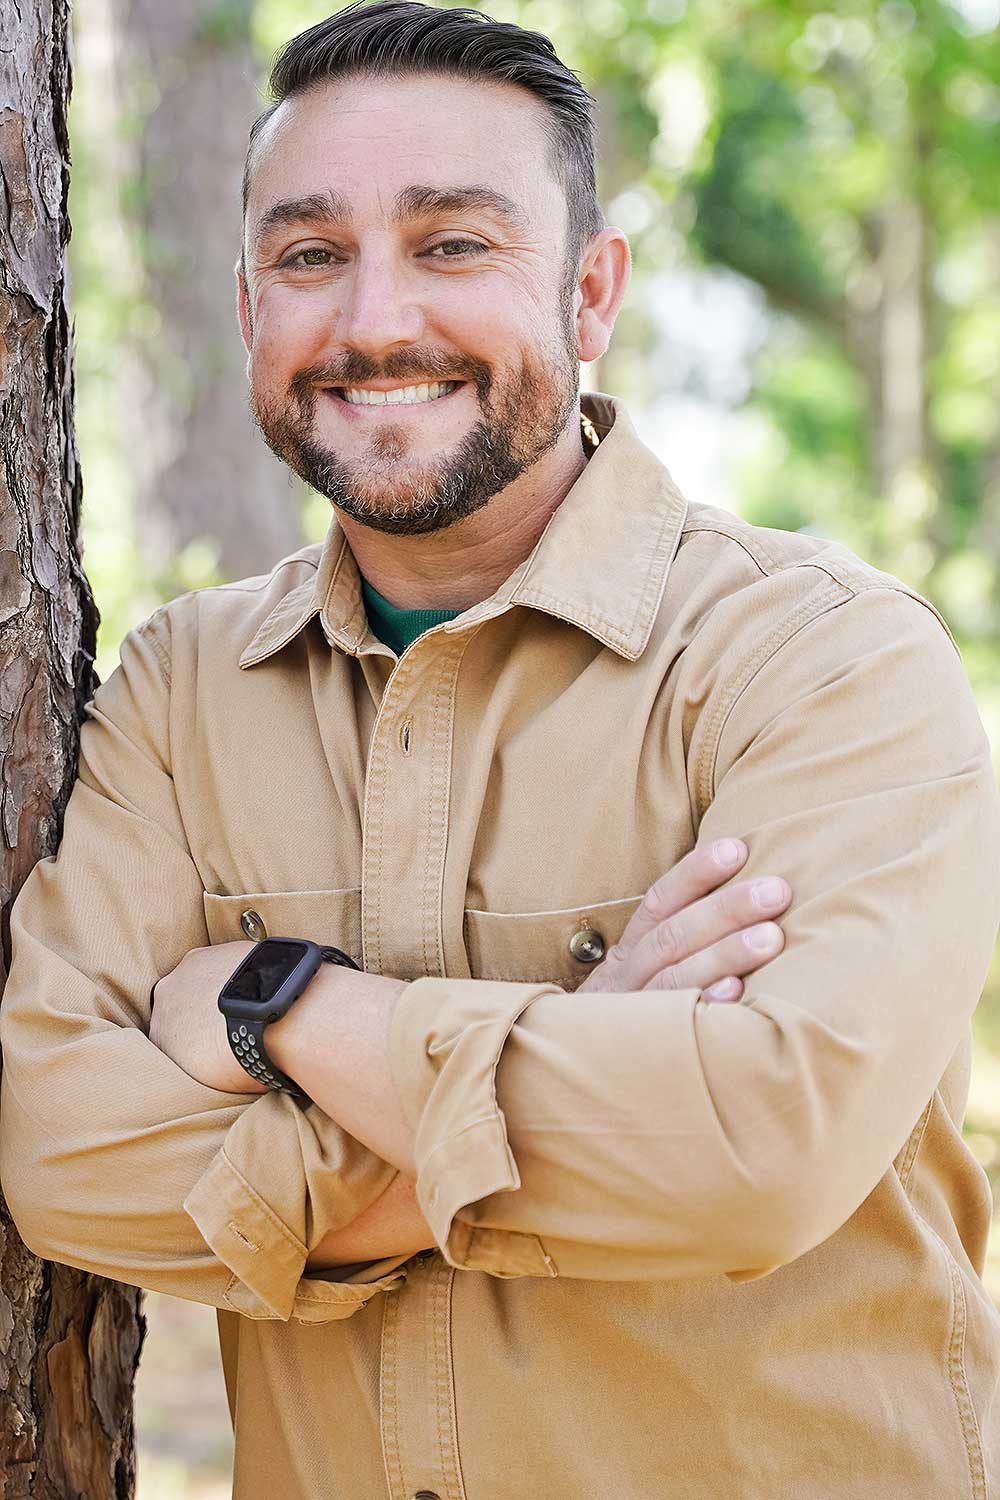 Joshua Shamp - Operations Manager + #1 pest pro for Yellowhammer Pest Solutions in Saraland AL.